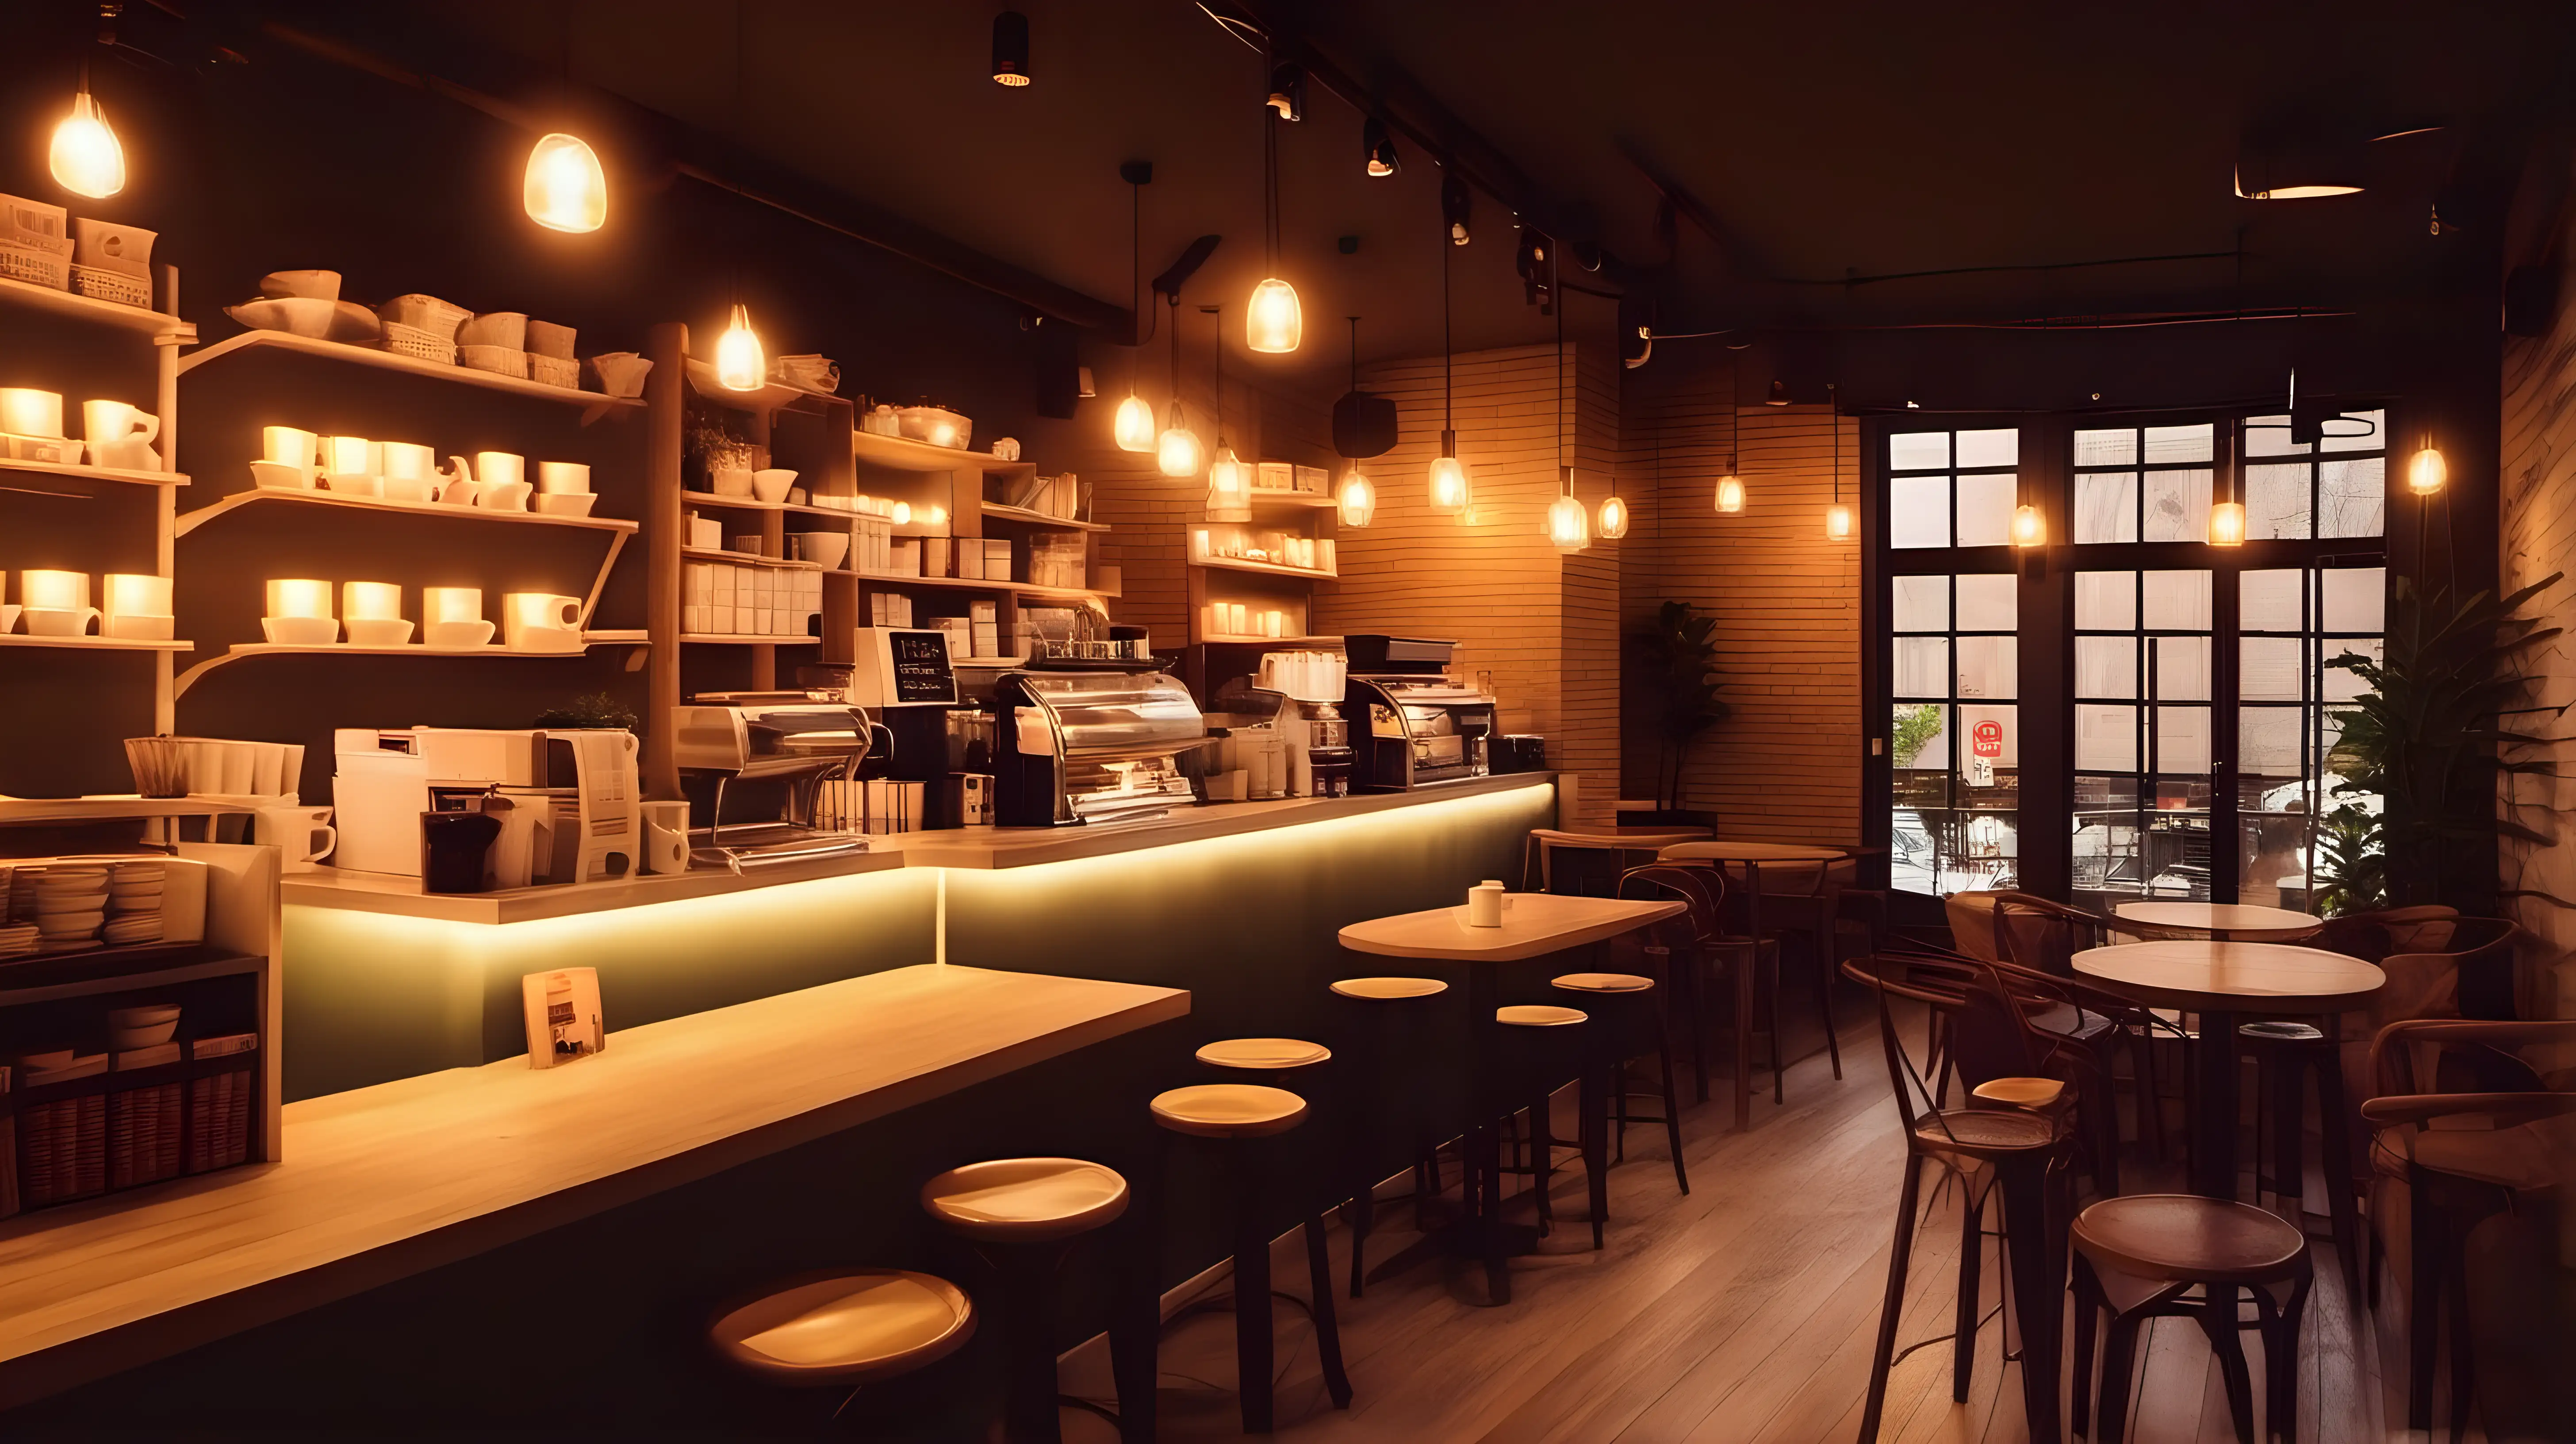 Warm and Inviting Coffee Shop Interior with Soft Lighting